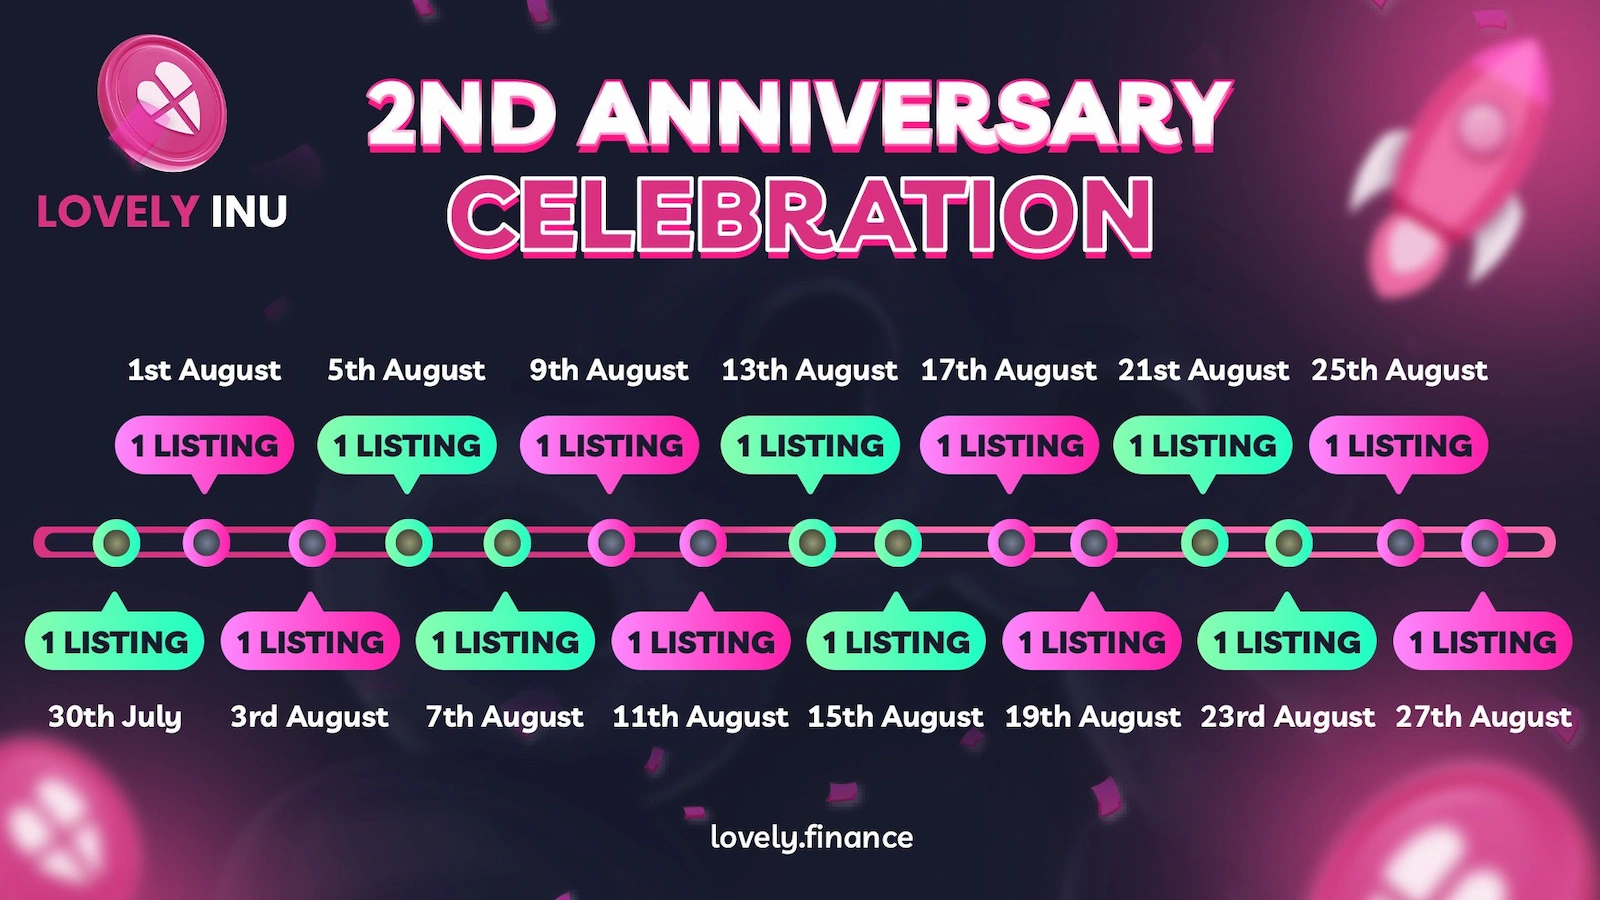 The Lovely Inu Finance team announced plans for 10 exchange listings beginning from its anniversary.